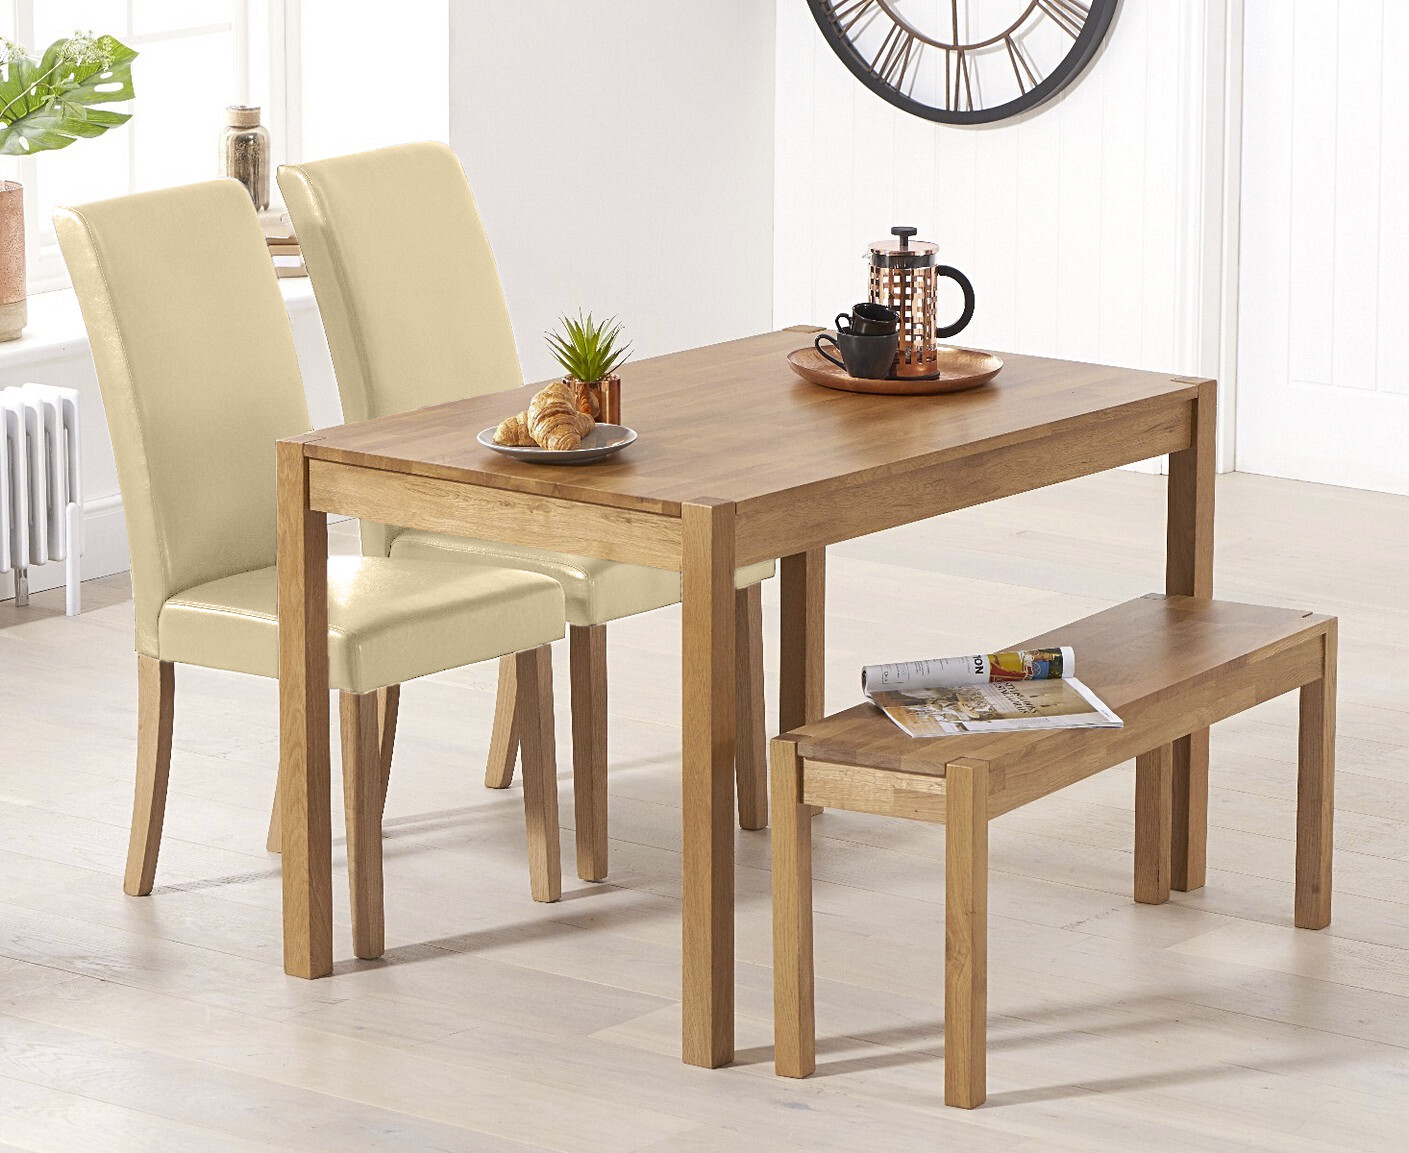 York 120cm Solid Oak Dining Table With 2 Cream Olivia Chairs And 2 York Bencheses